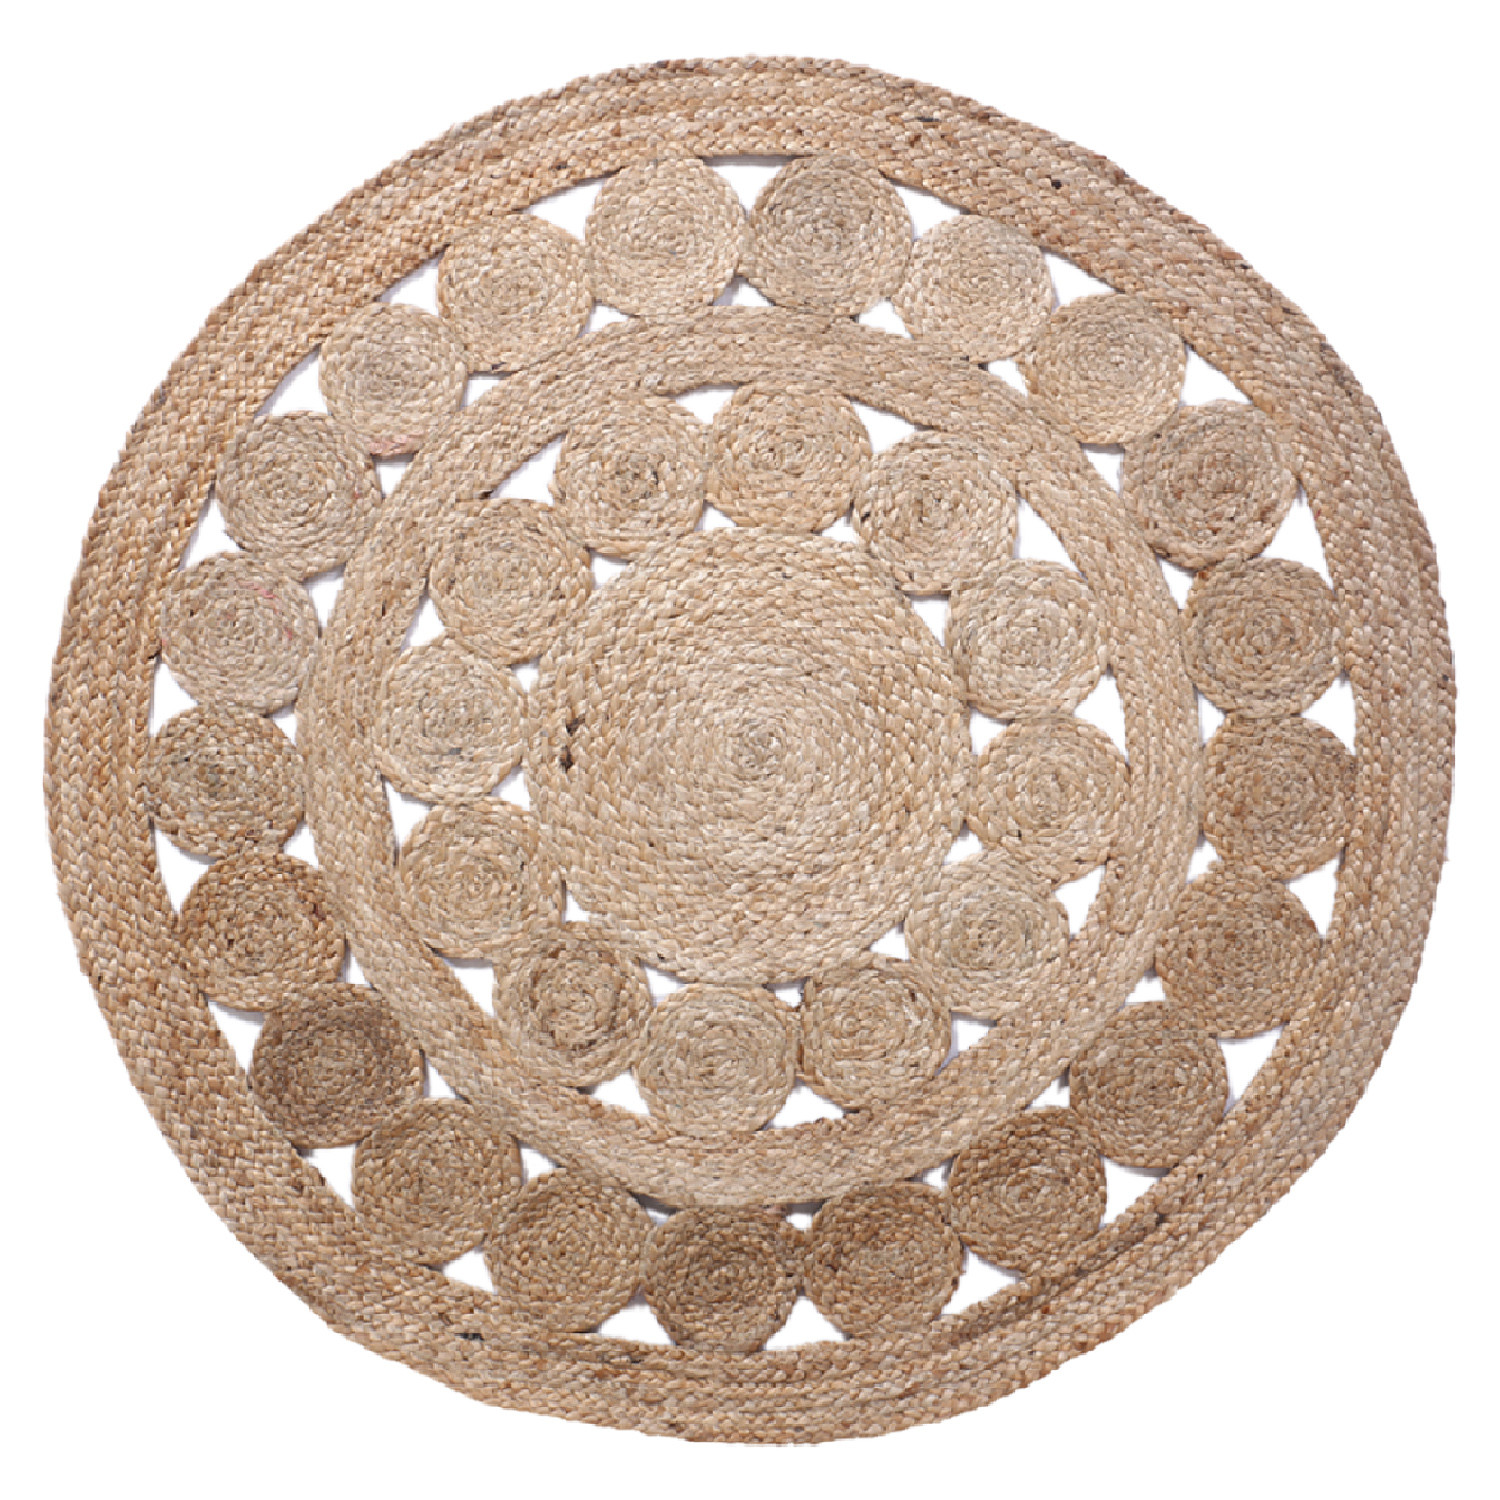 Kuber Industries Hand Woven Carpet Rugs|Natural Stitch Braided Jute Door mat|Multi Circle Border Shape Mat For Bedroom,Living Room,Dining Room,Yoga,91x91 cm,(Brown)